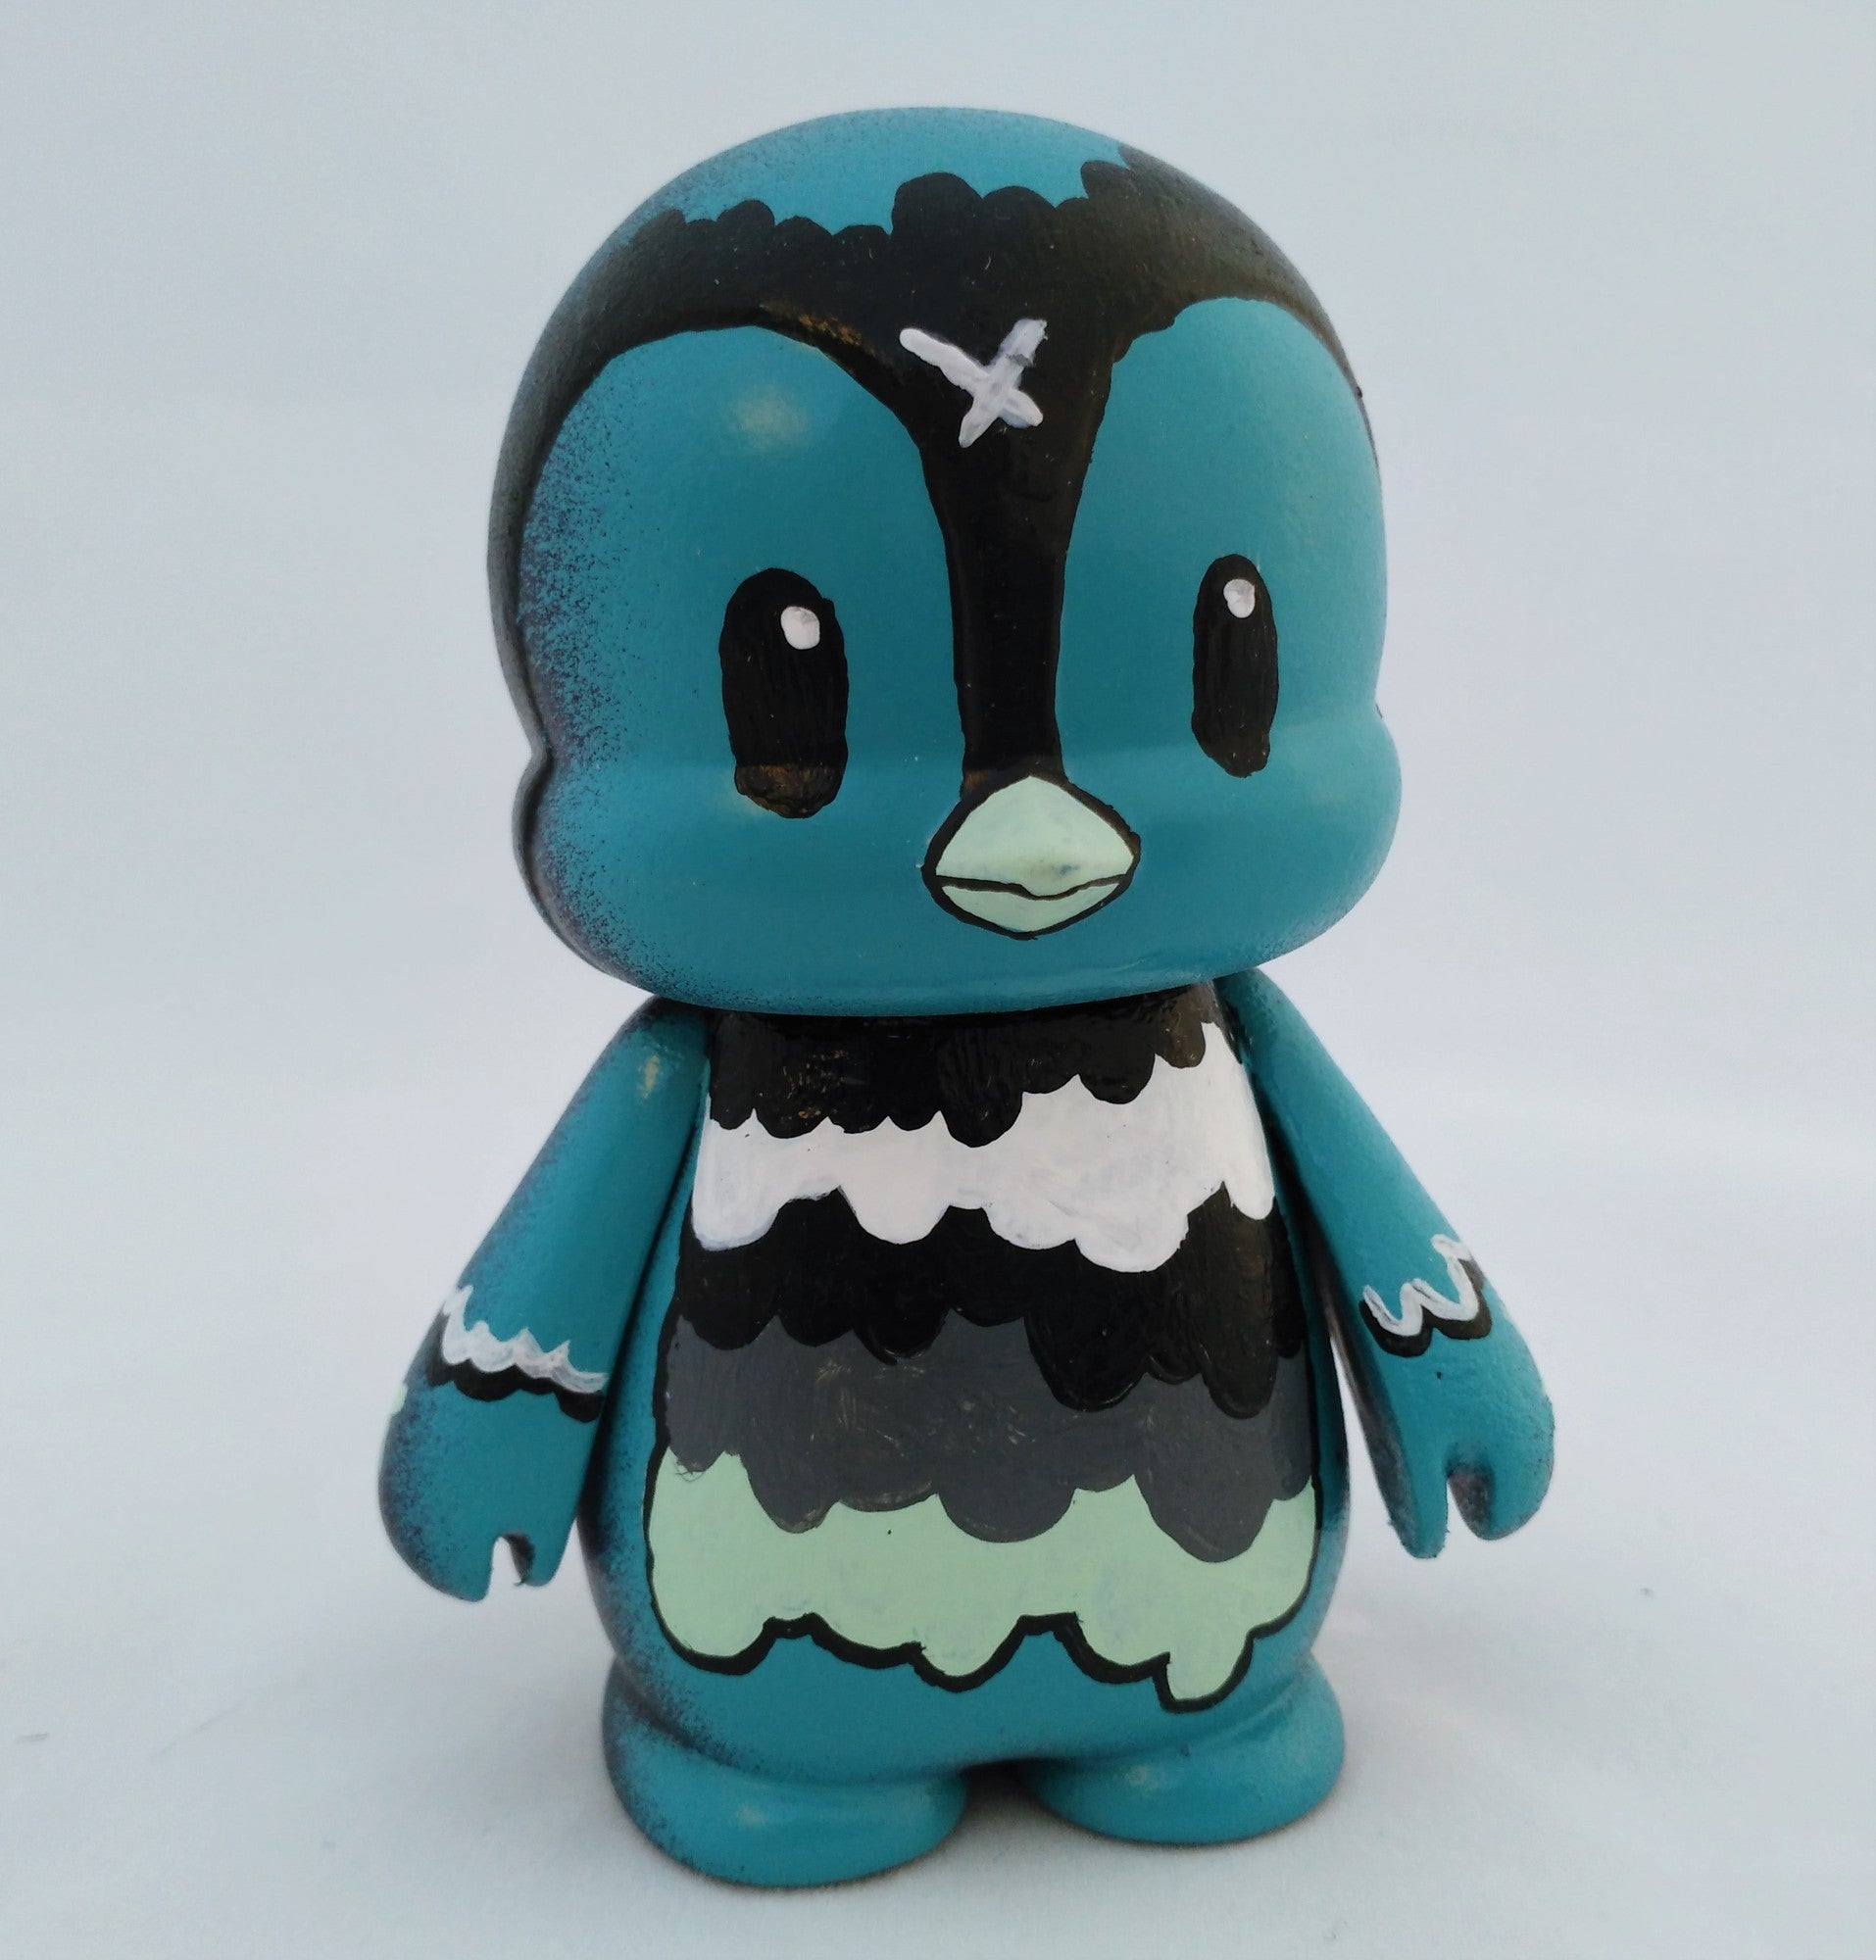 Custom Waddle figurine from Miles by Nicky Davis, featuring a cartoon animal with black and white paint details.